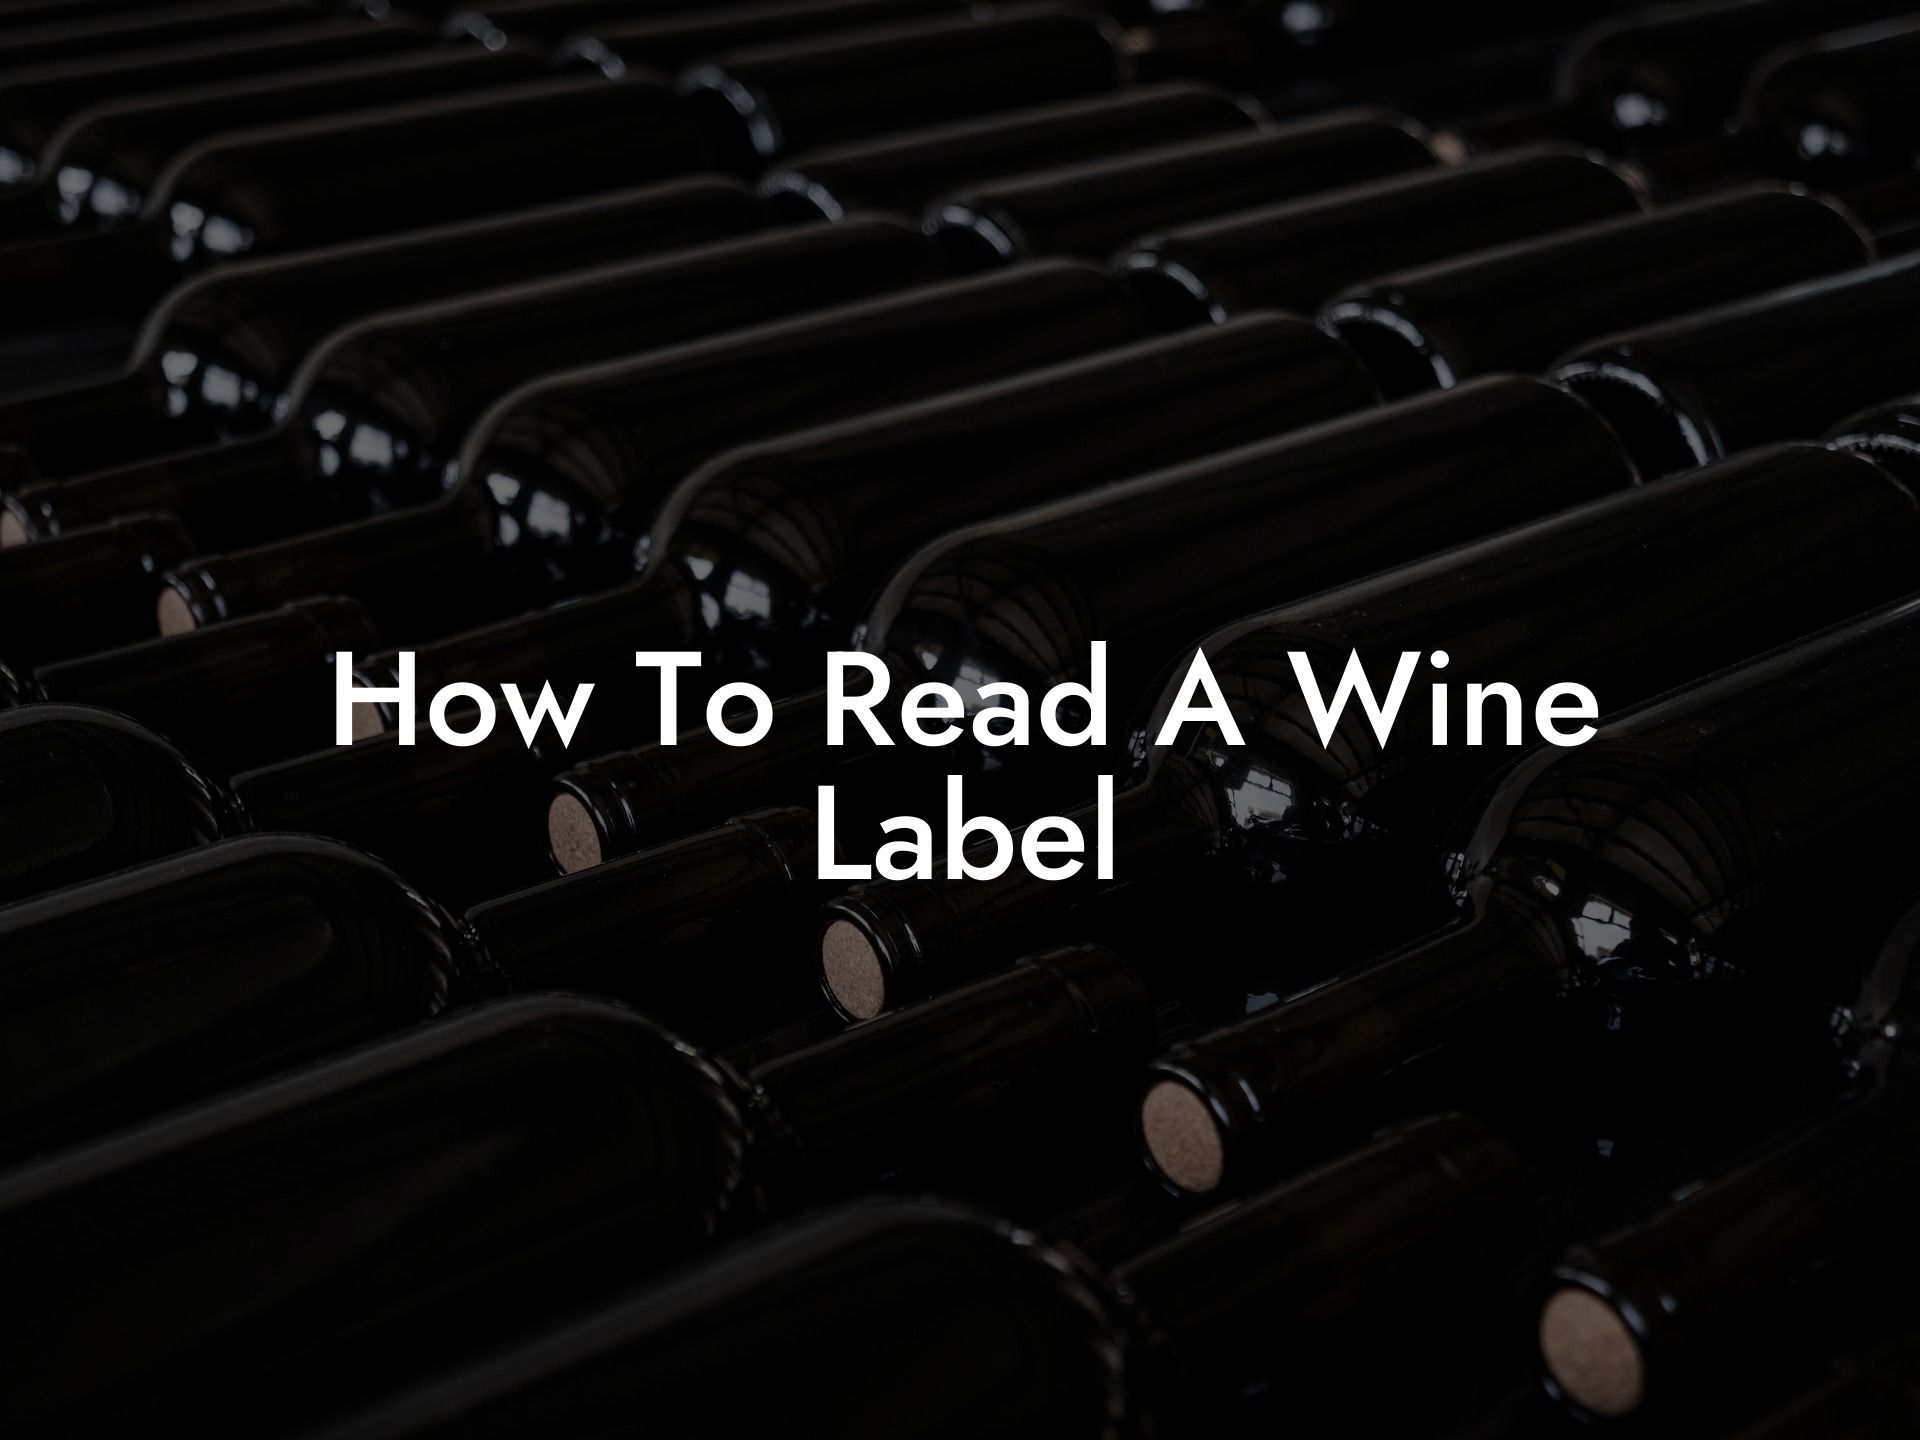 How To Read A Wine Label